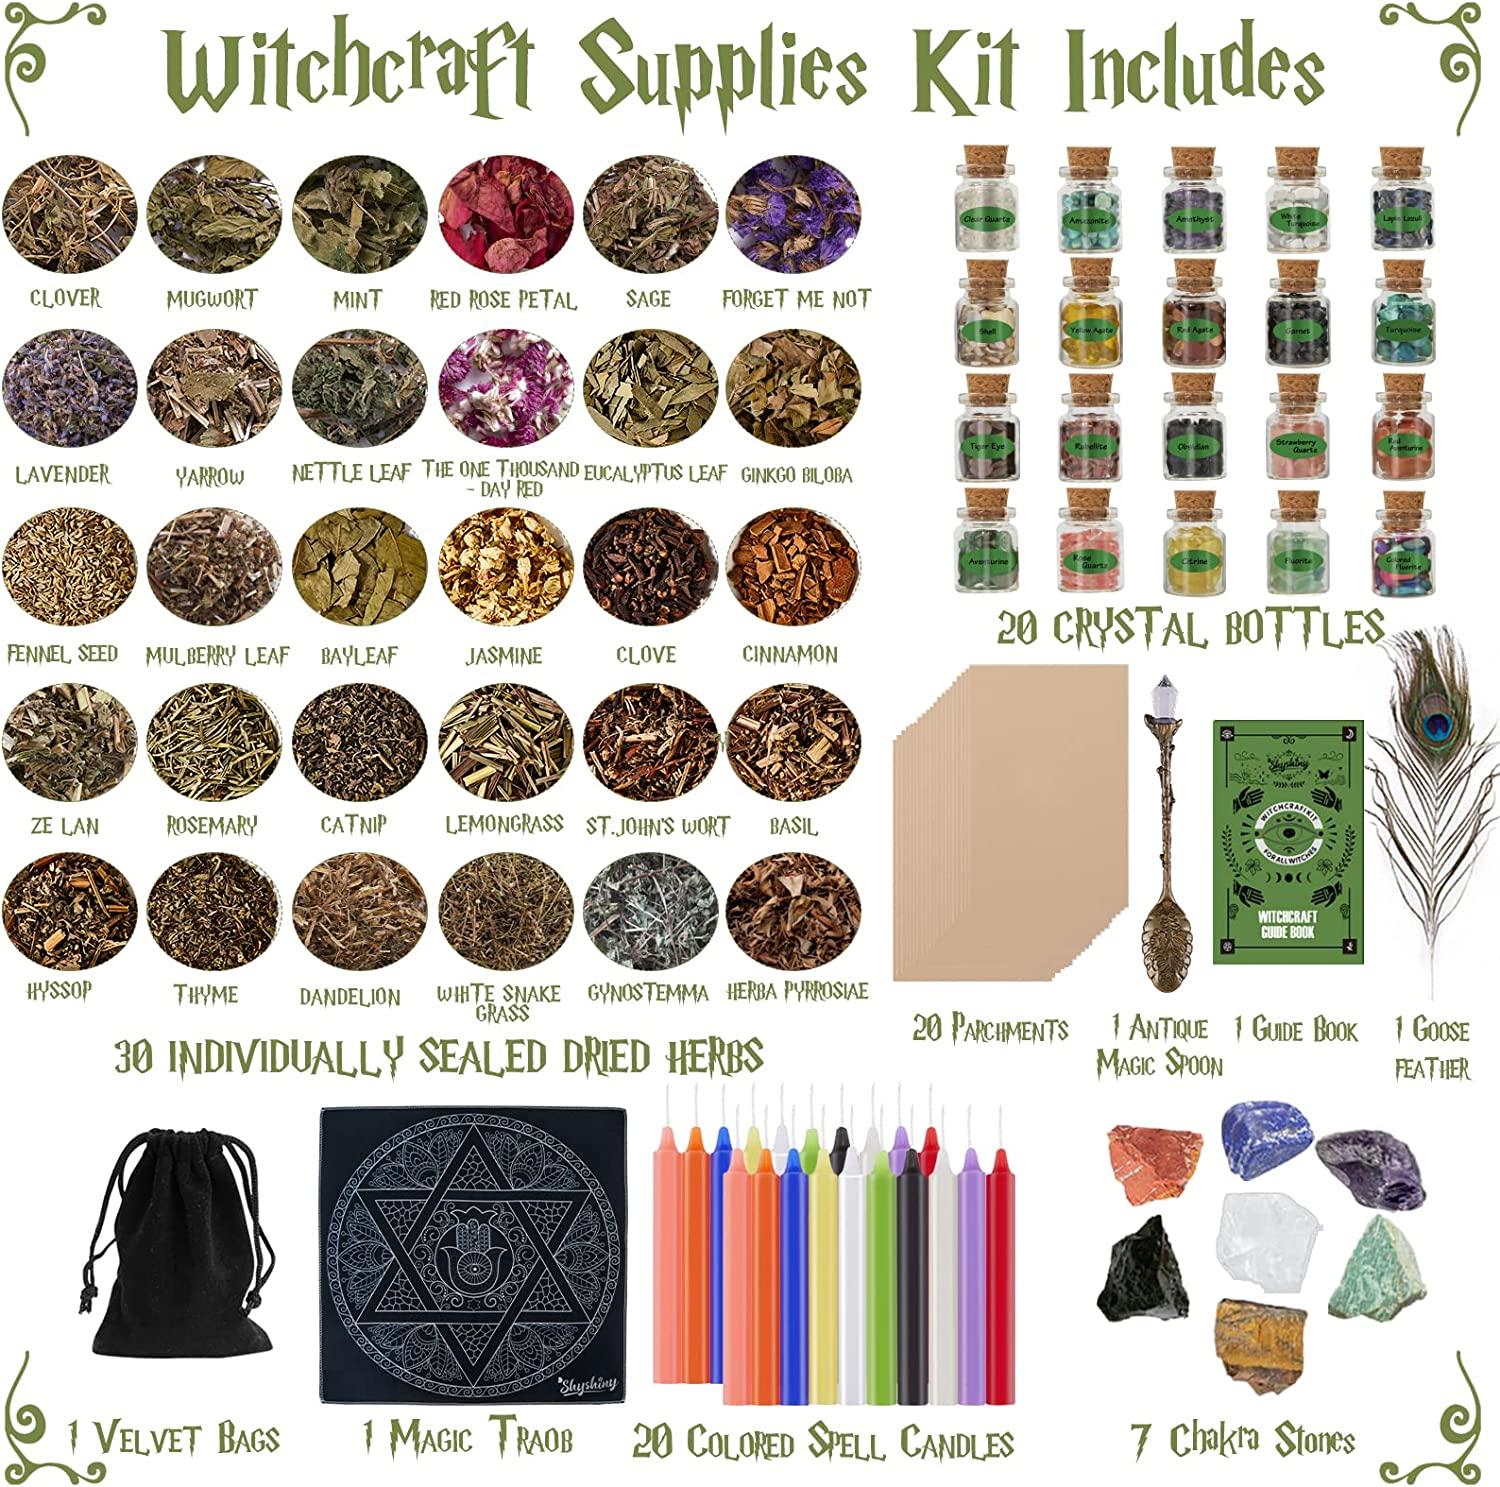 Witchcraft Supplies Herbs - 30 Bottles Dried Herbs Kit for Beginners -  Altar Supplies Healing Herbal Natural Herbs Crystal Spoon for Wicca, Pagan